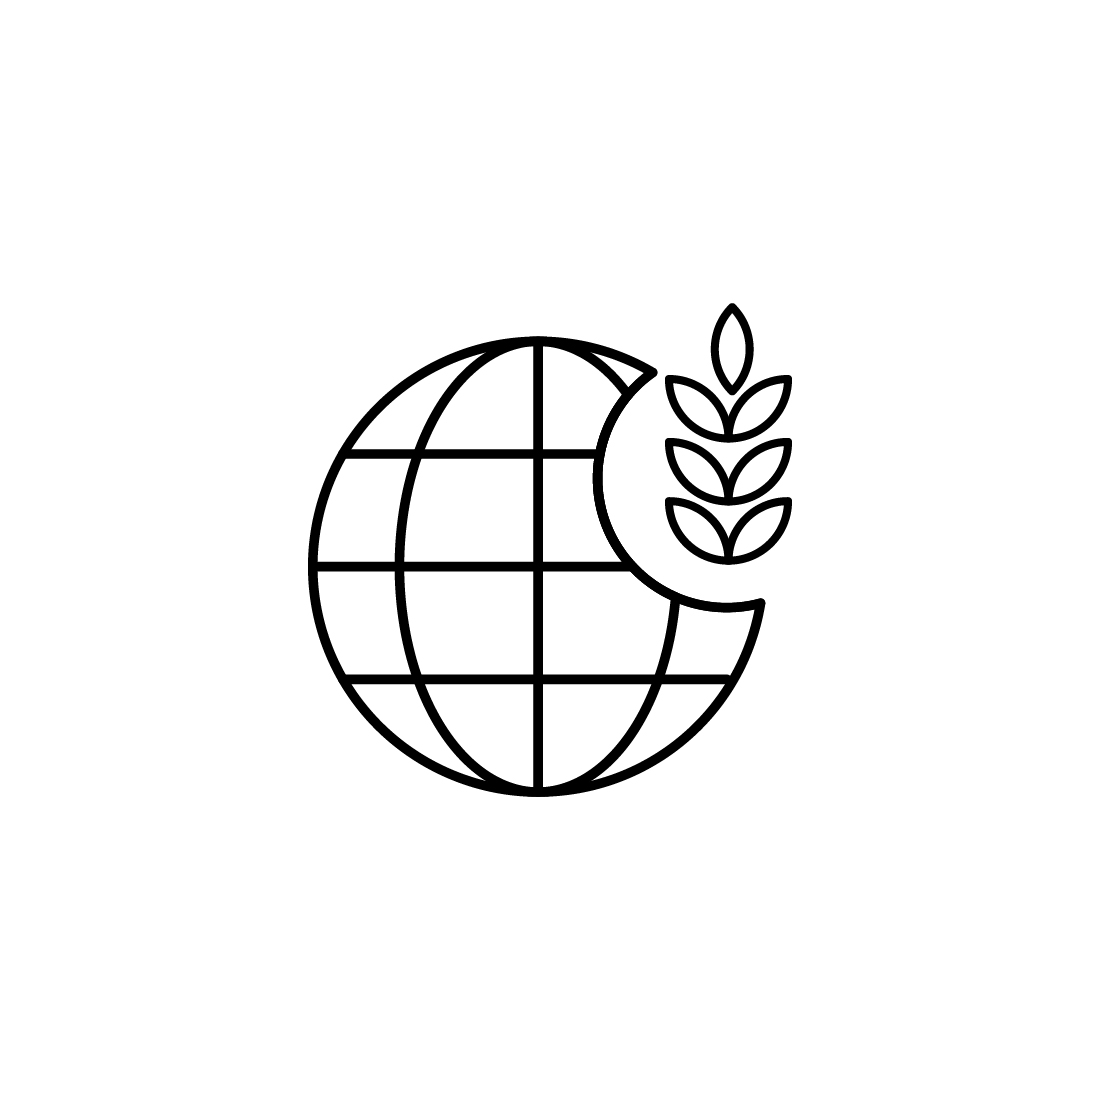 Black and white image of a globe with a plant growing out of it.